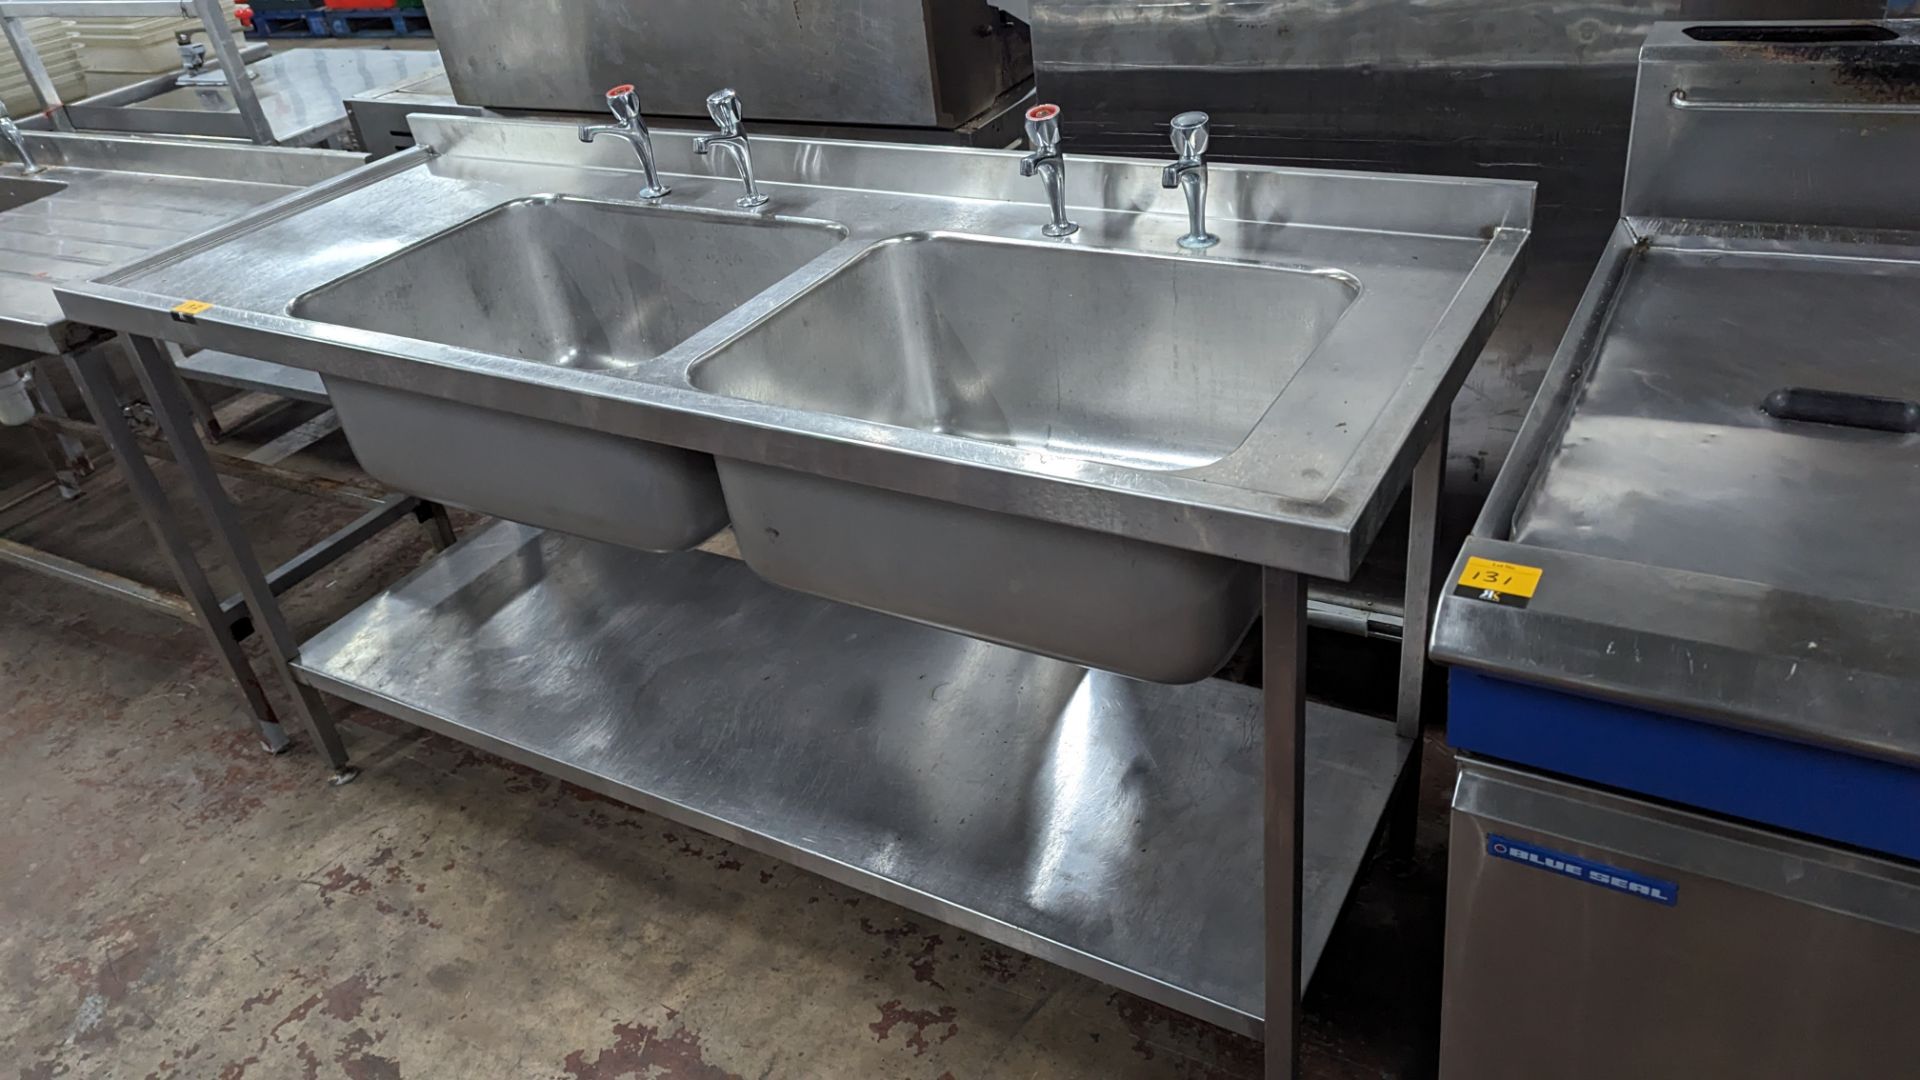 Large stainless steel floor standing twin bowl sink arrangement with built-in drainer & a pair of ta